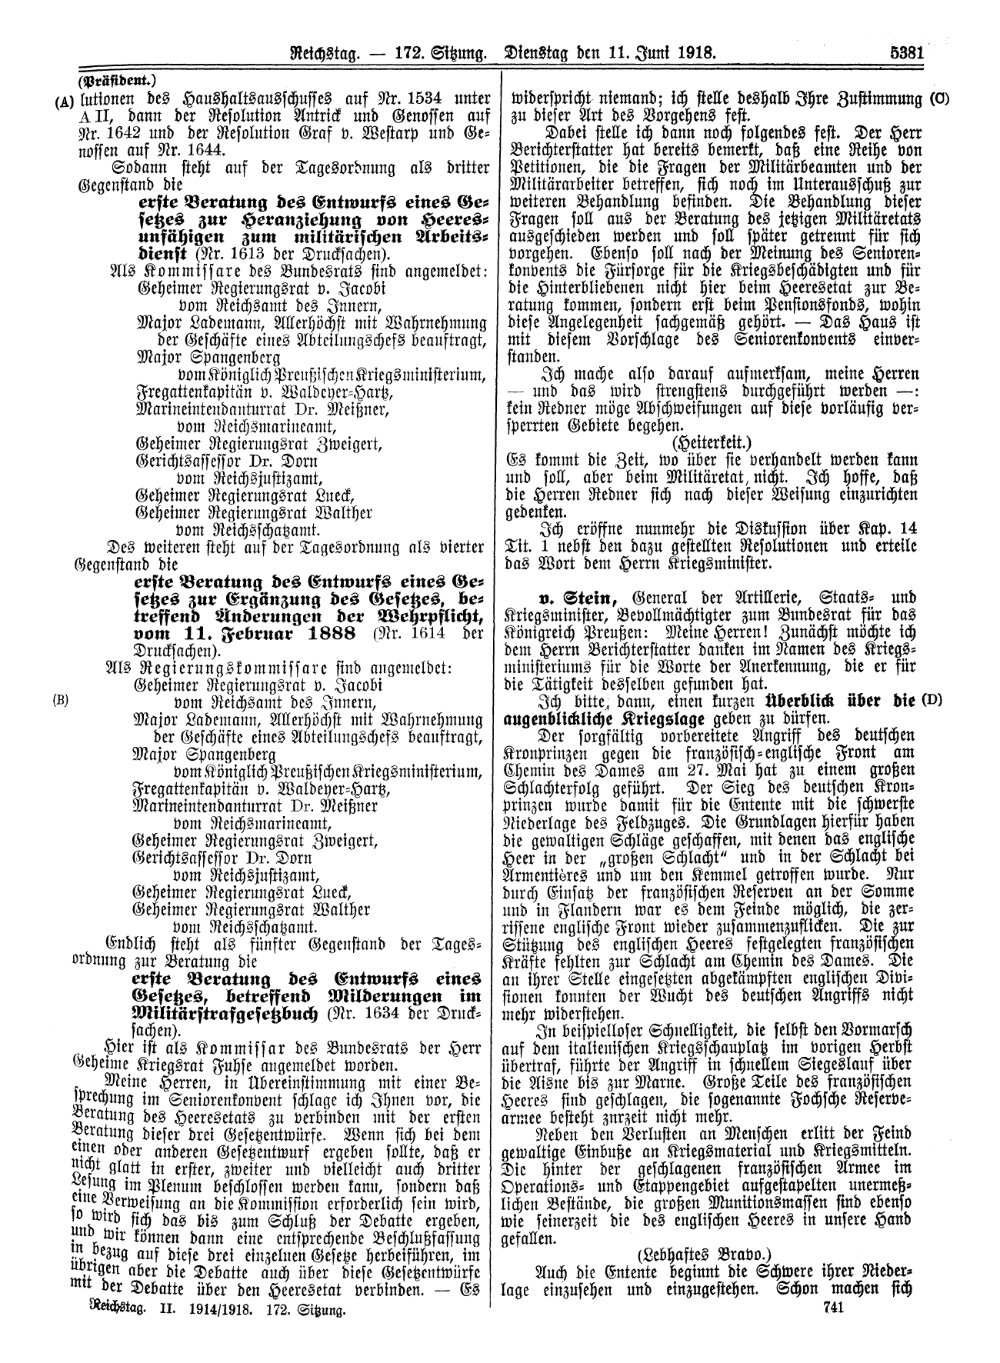 Scan of page 5381